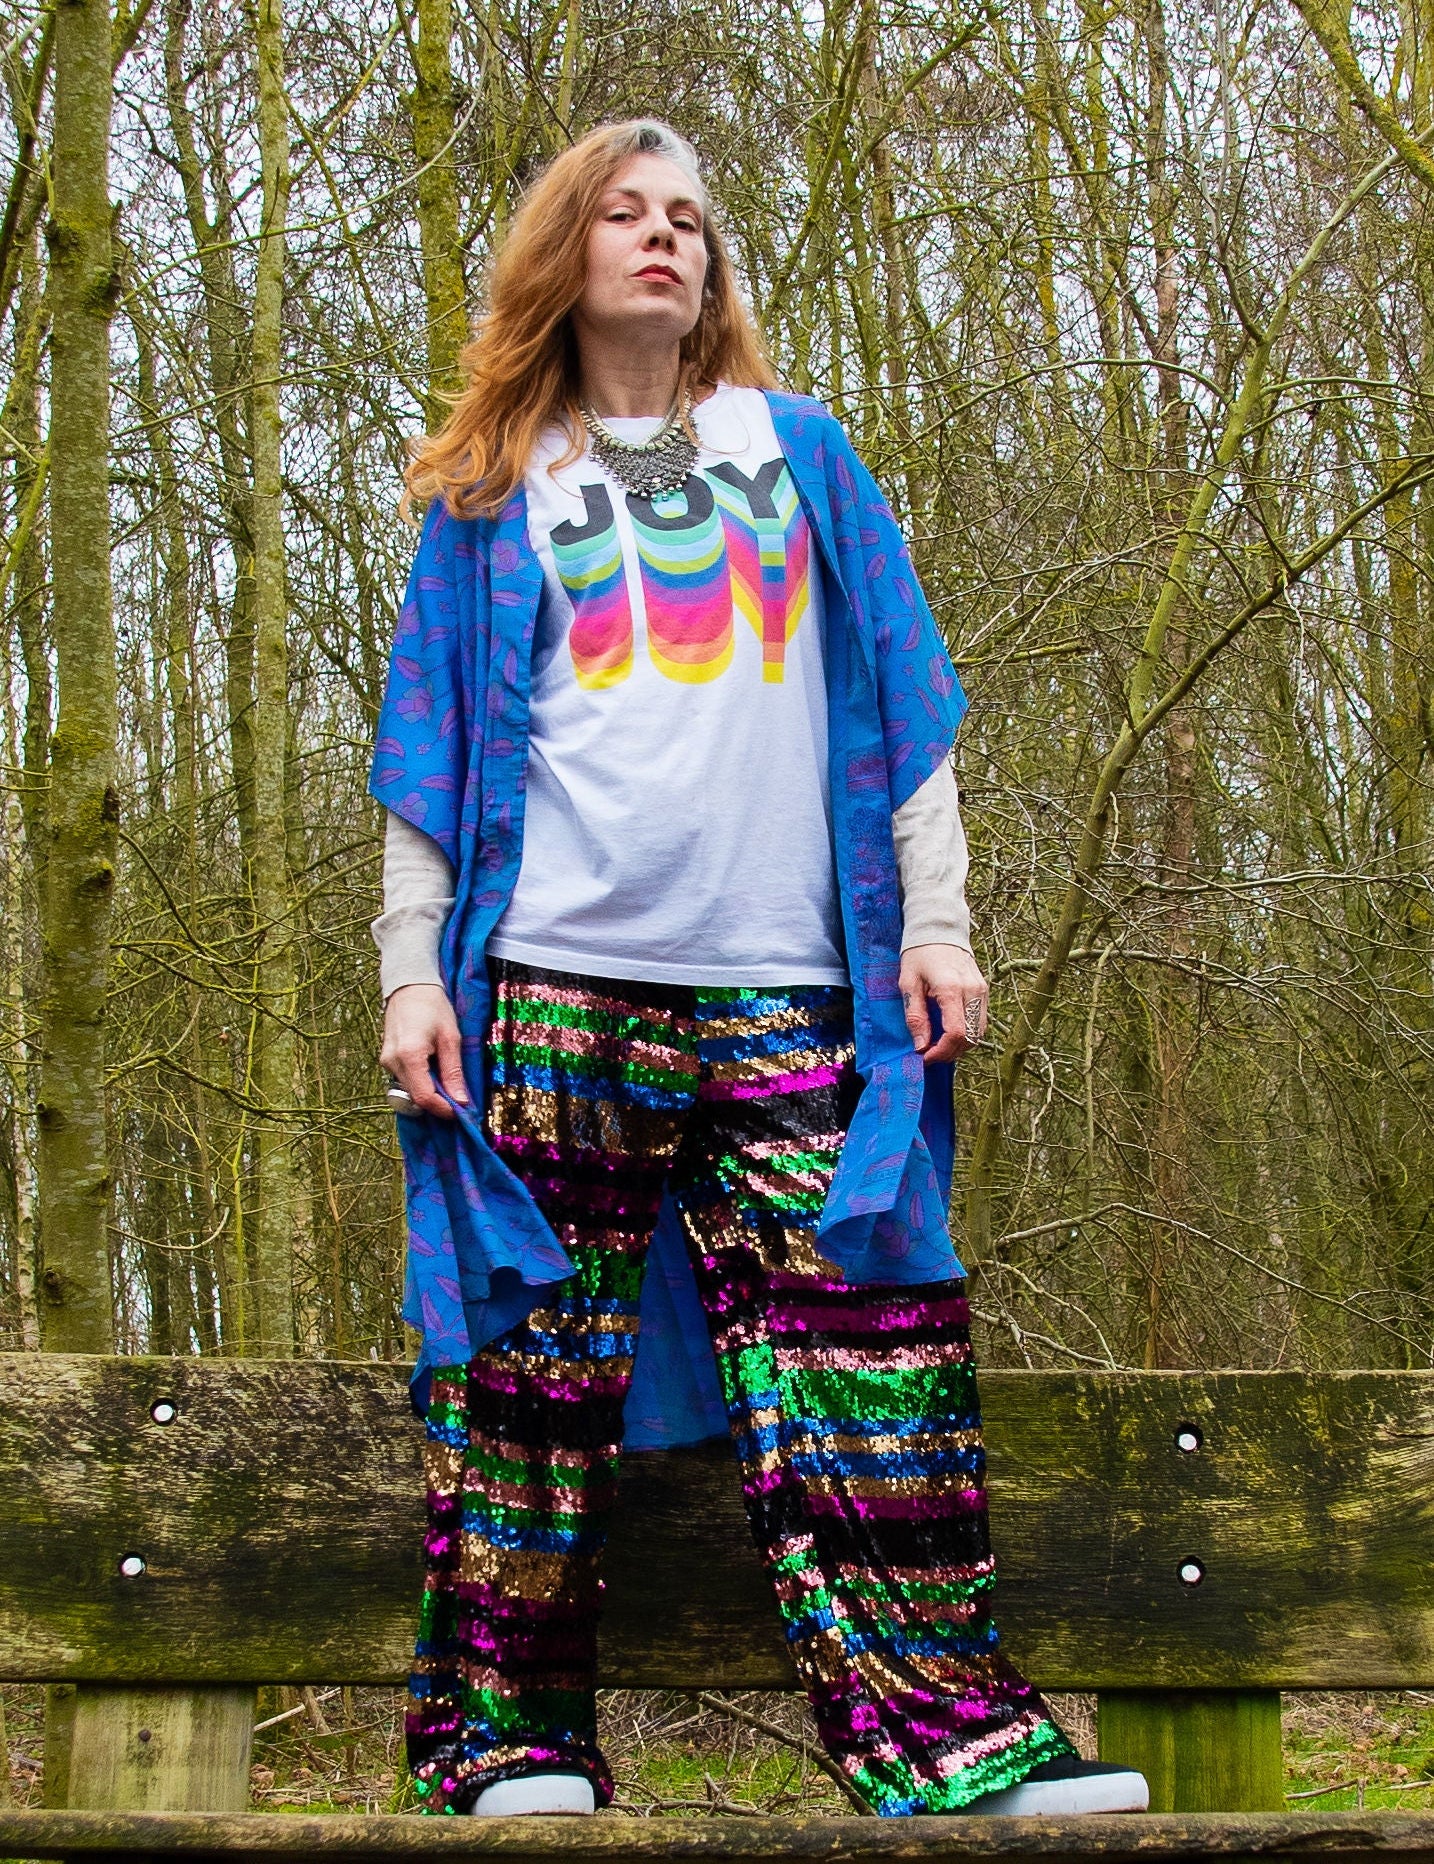 woman standing on bench wearing t shirt saying joy with sequin pants and neem wrap dress